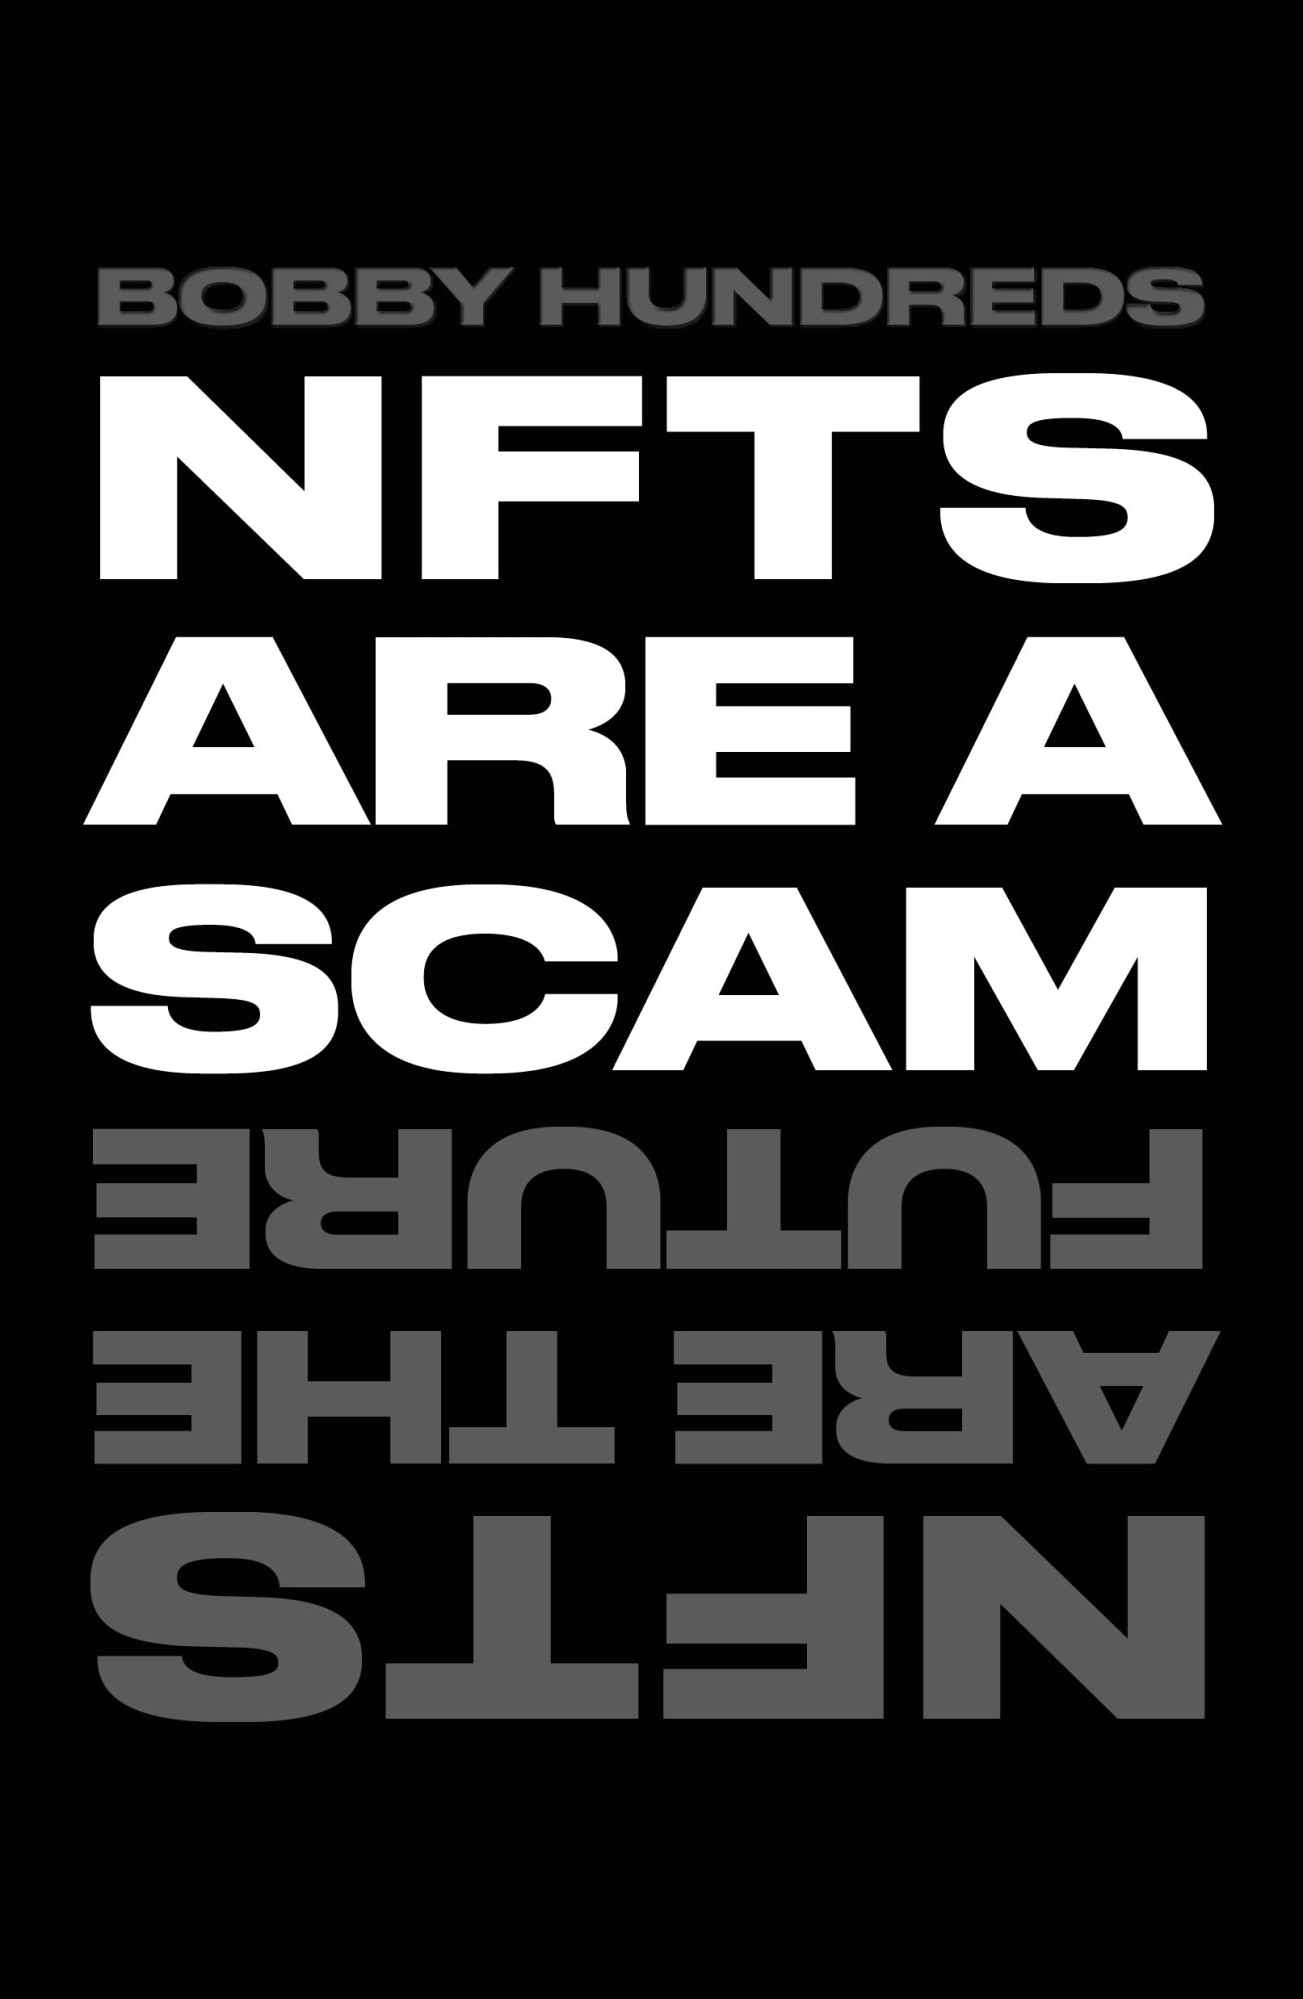 cover of book, NFTs are a Scam